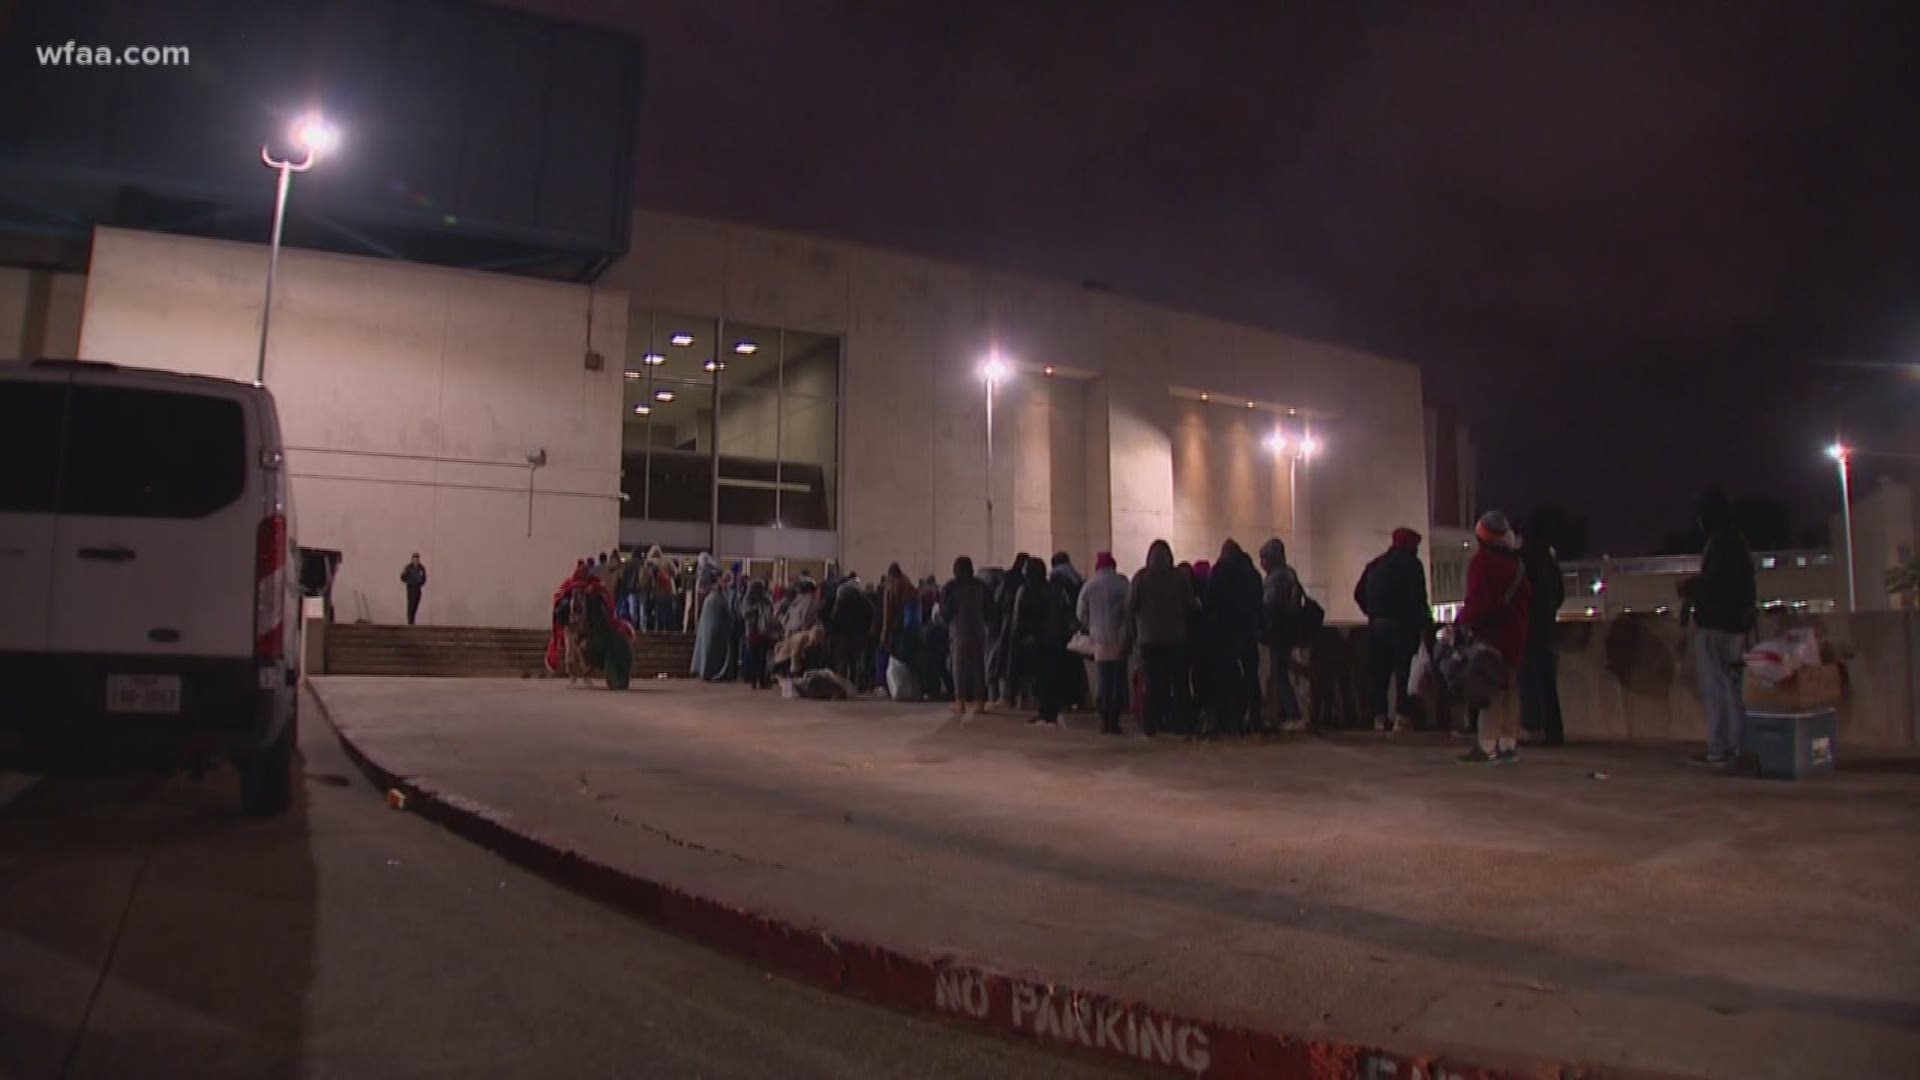 Religious leader speaks out after screening and arrests at a temporary shelter in Dallas on a cold night.